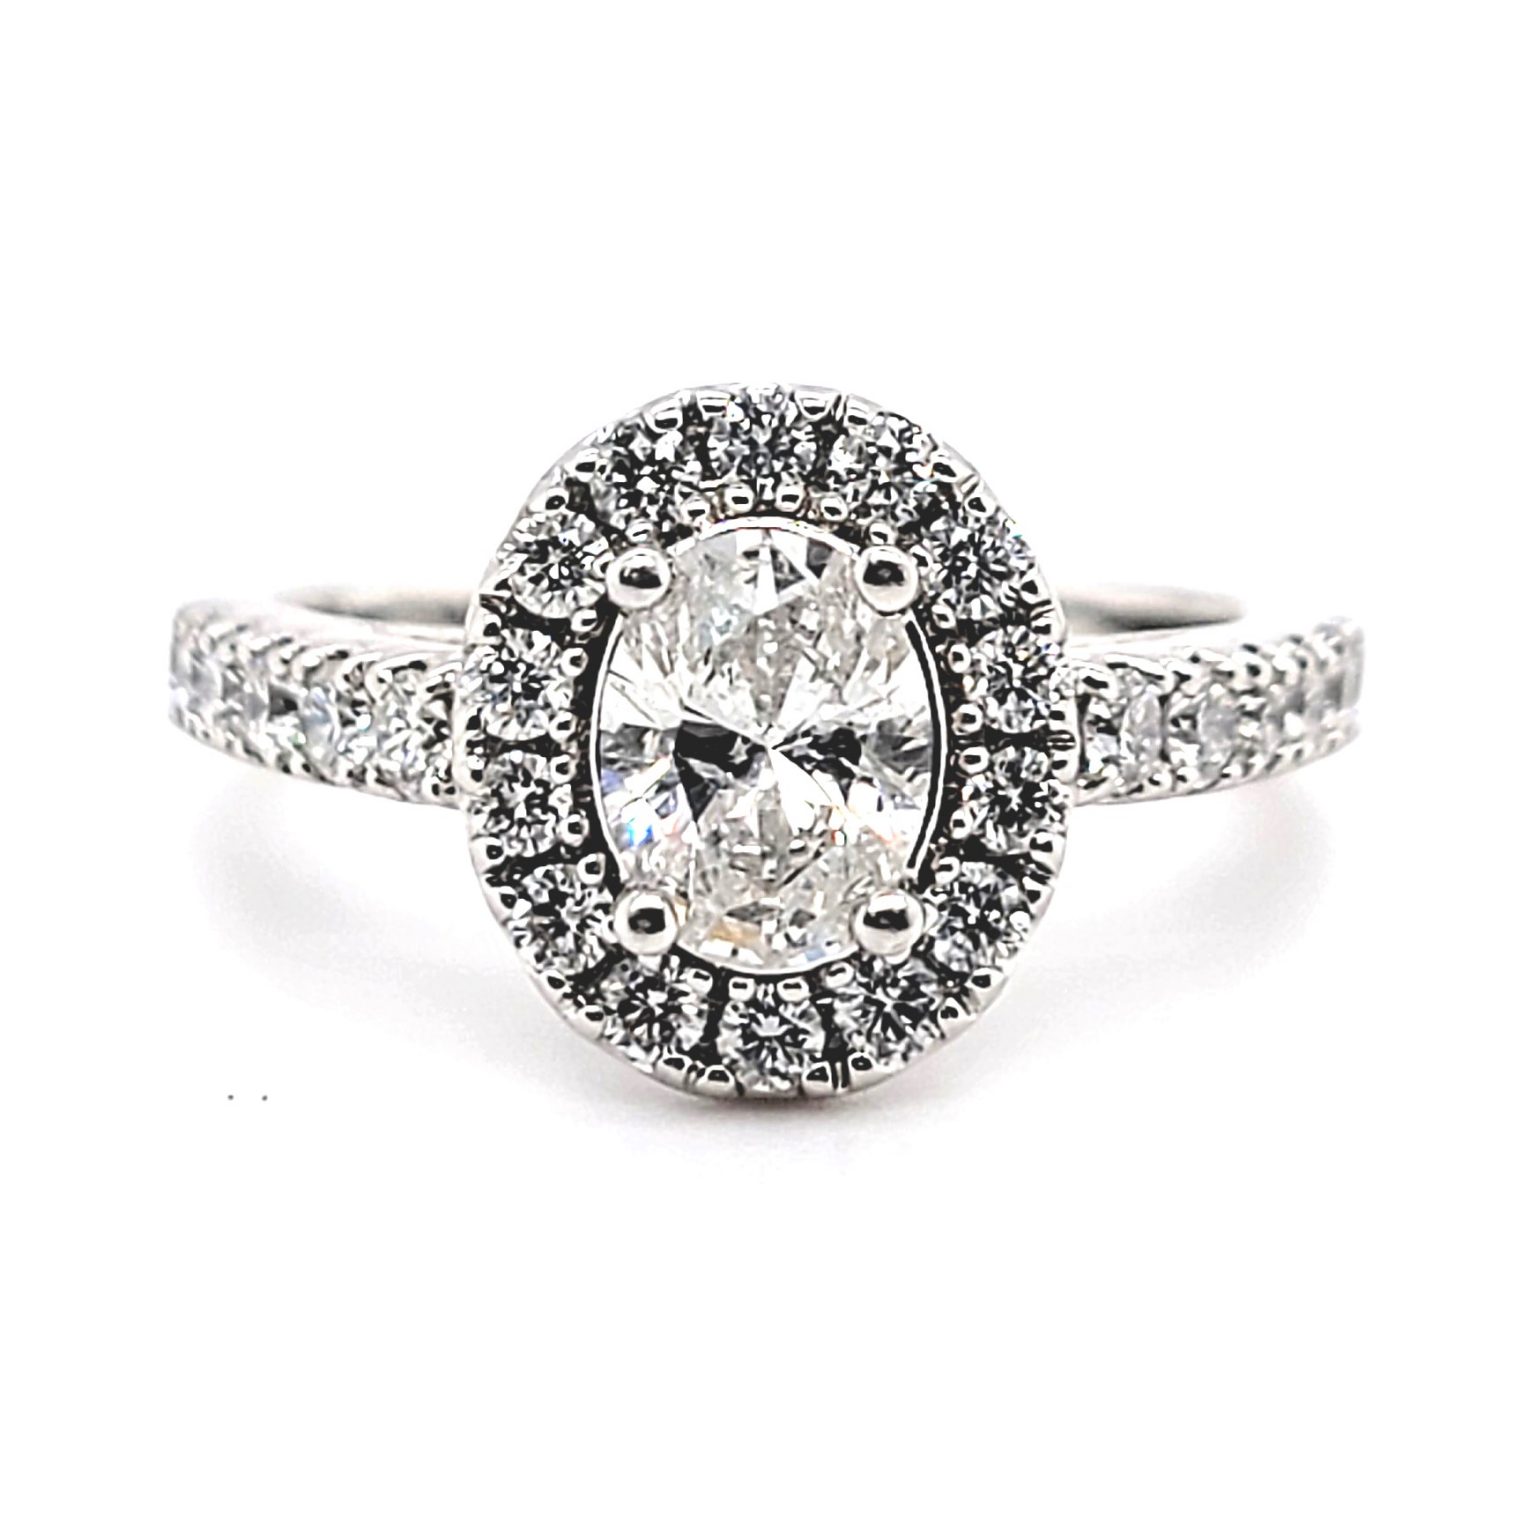 Engagement Rings over $2500 Archives - McKenzie & Smiley Jewelers ...